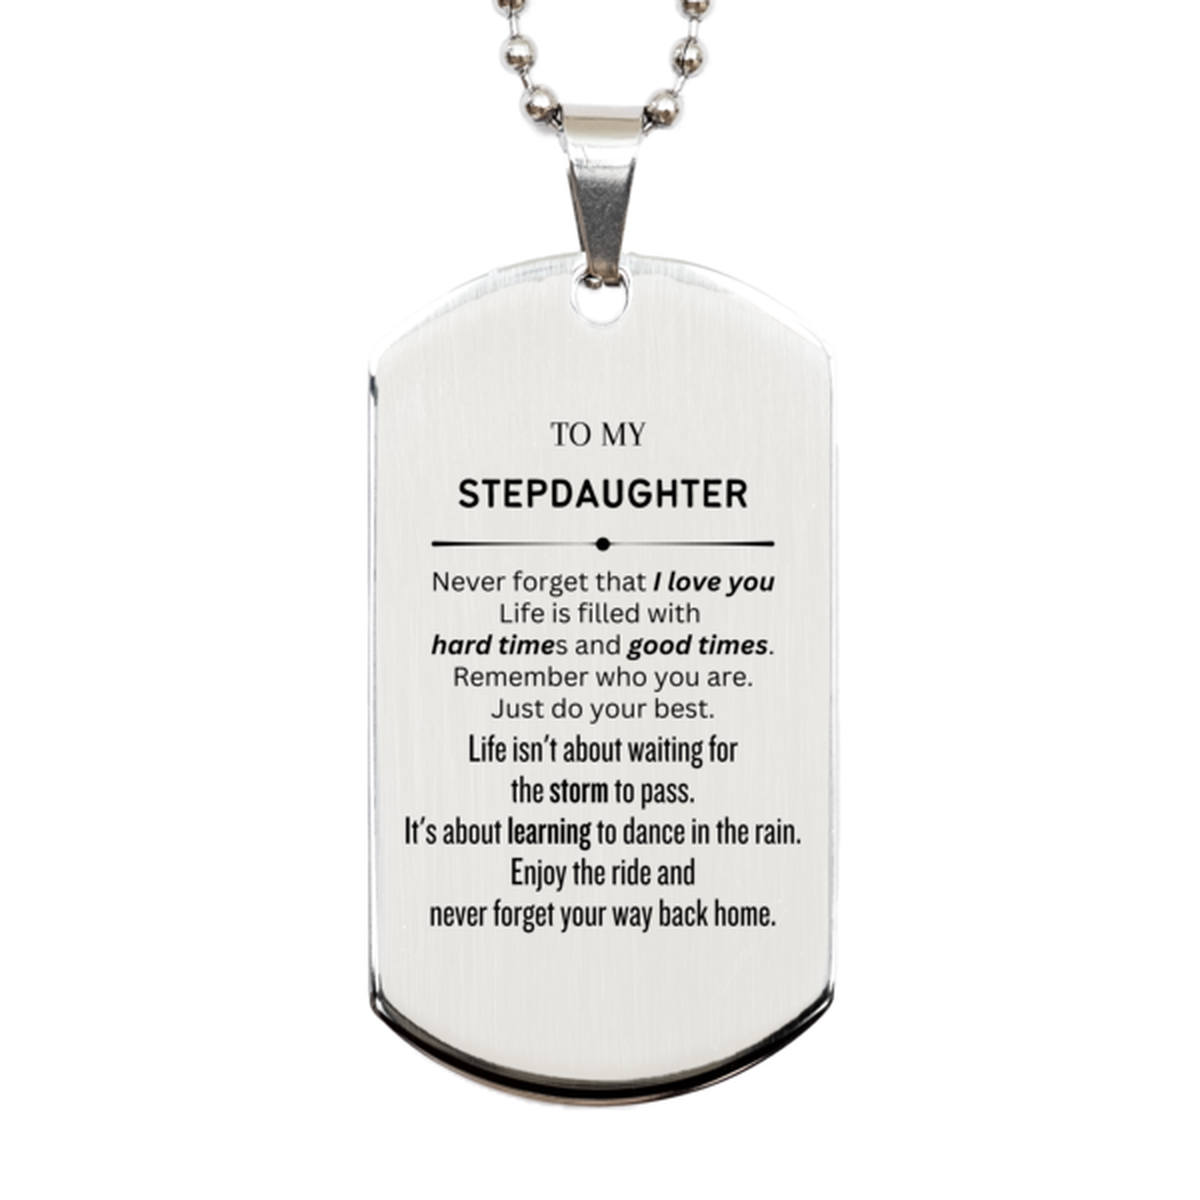 Christmas Stepdaughter Silver Dog Tag Gifts, To My Stepdaughter Birthday Thank You Gifts For Stepdaughter, Graduation Unique Gifts For Stepdaughter To My Stepdaughter Never forget that I love you life is filled with hard times and good times. Remember who